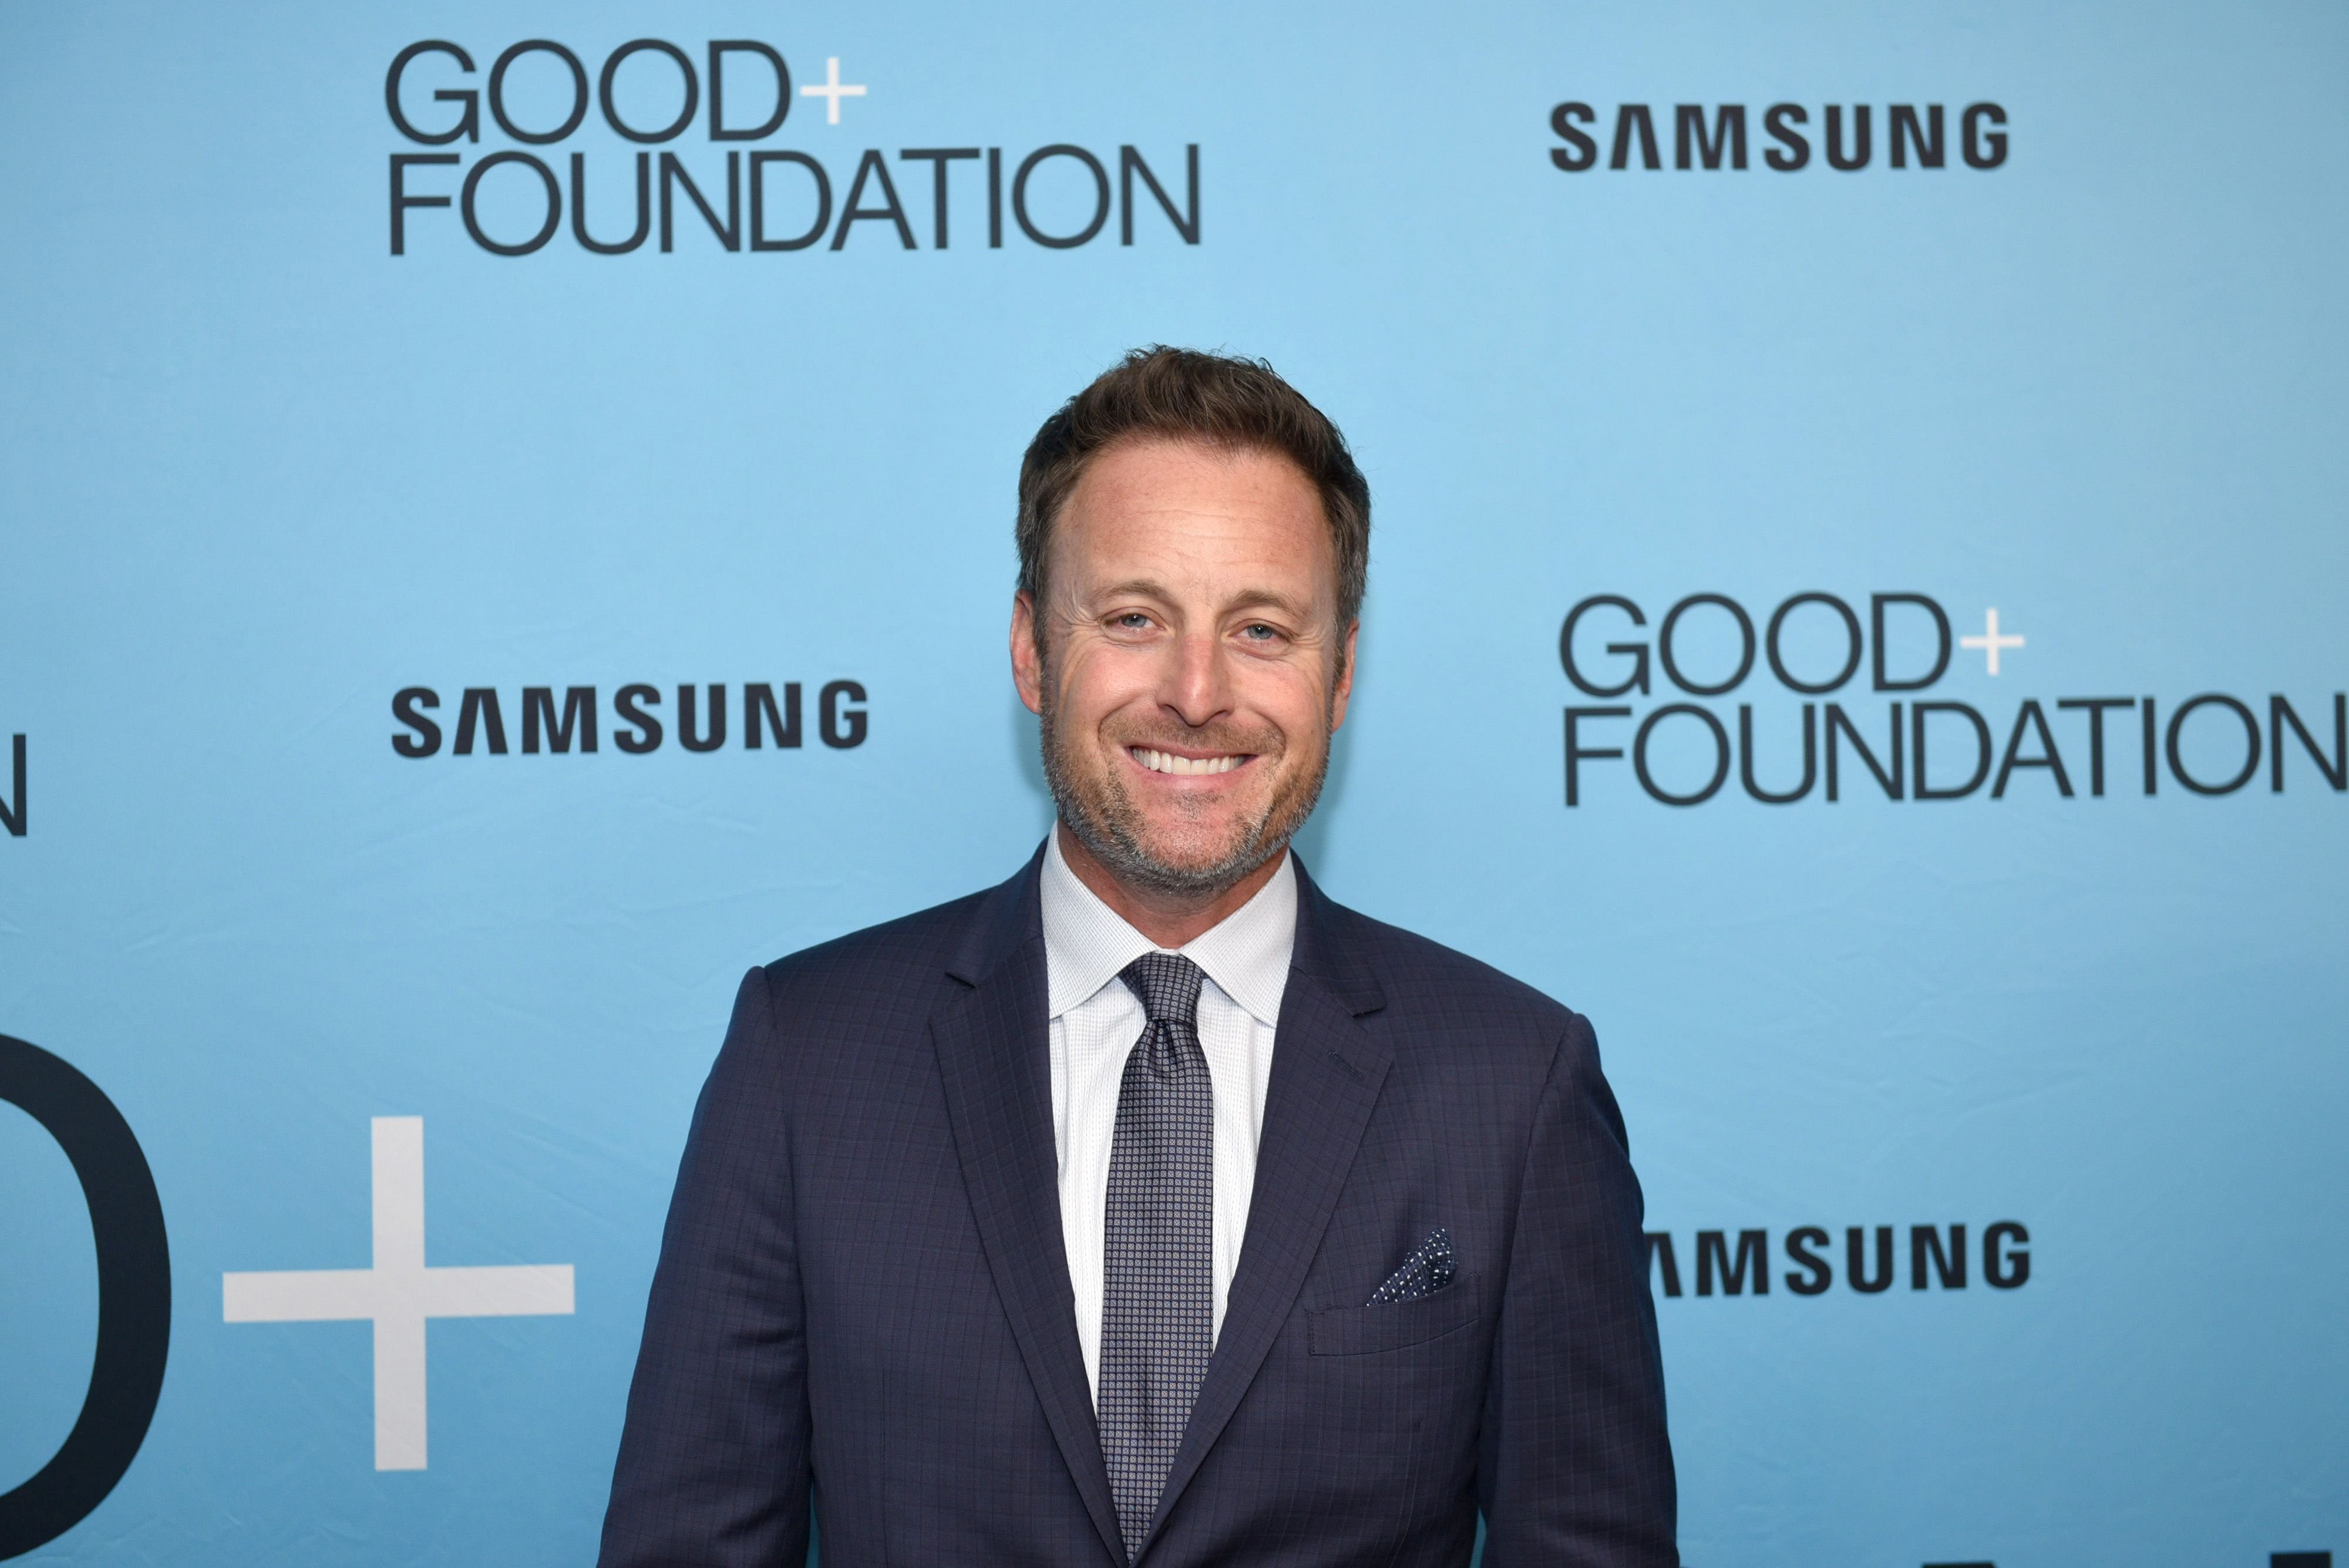 Chris Harrison at the 2018 GOOD+ Foundation's Evening of Comedy & Music Benefit in 2018 in New York City | Source: Getty Images